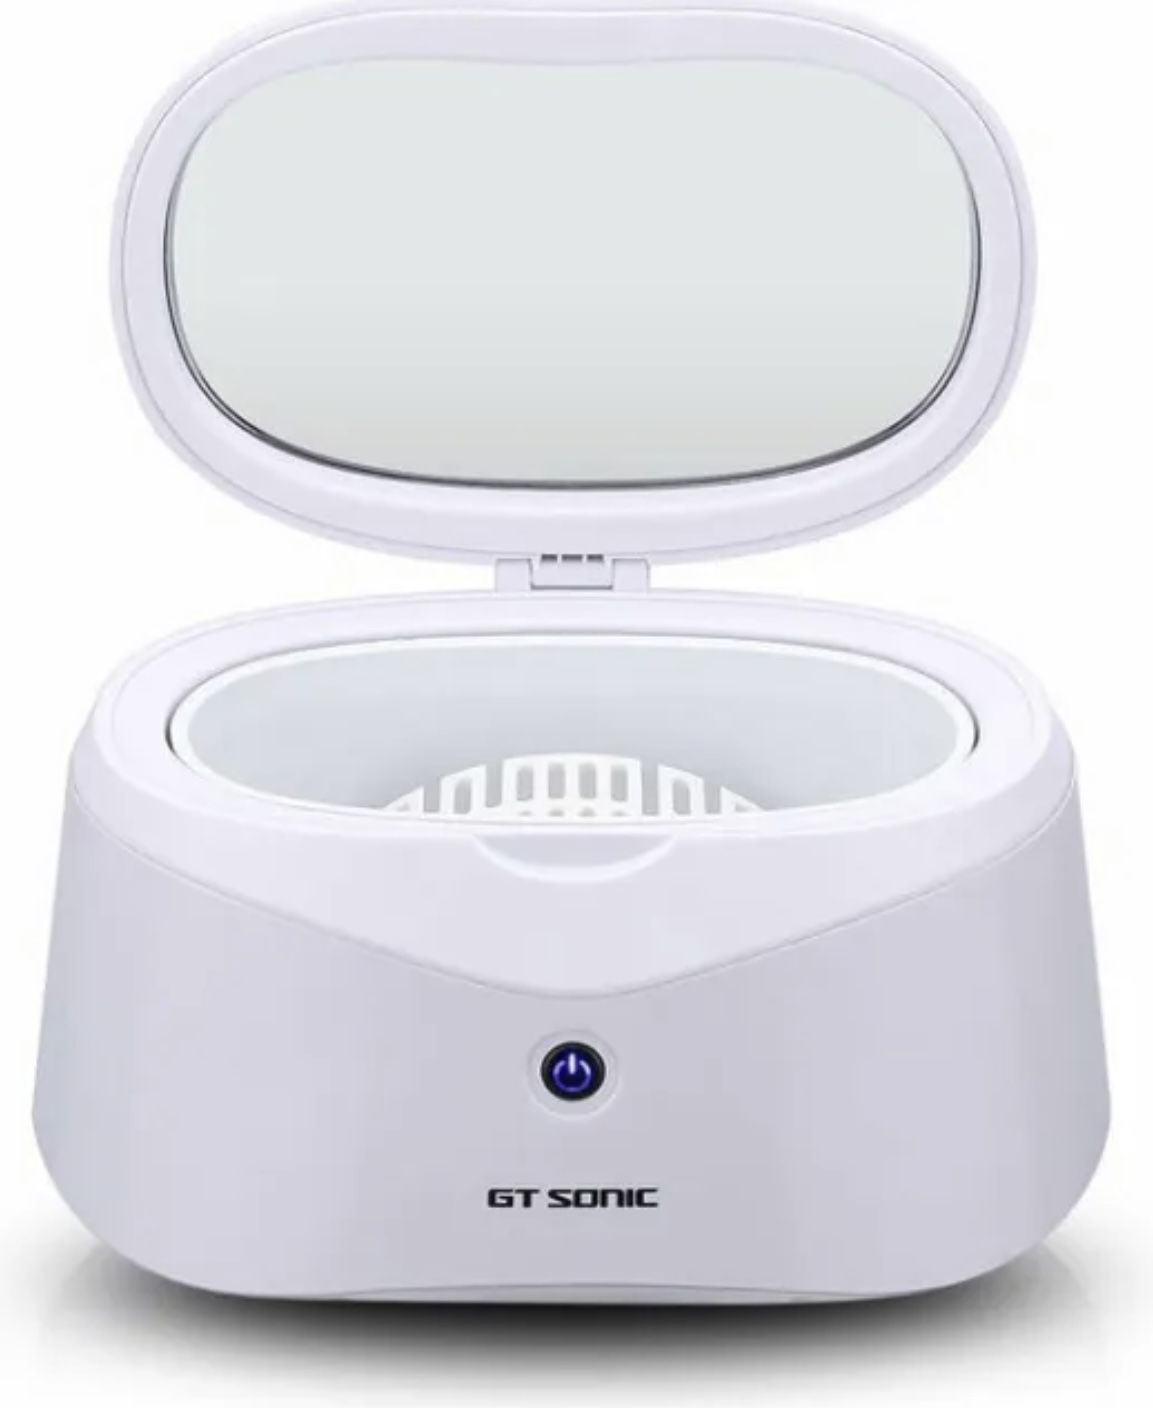 GT SONIC GT-F1 Unique Design Household Ultrasonic Cleaner